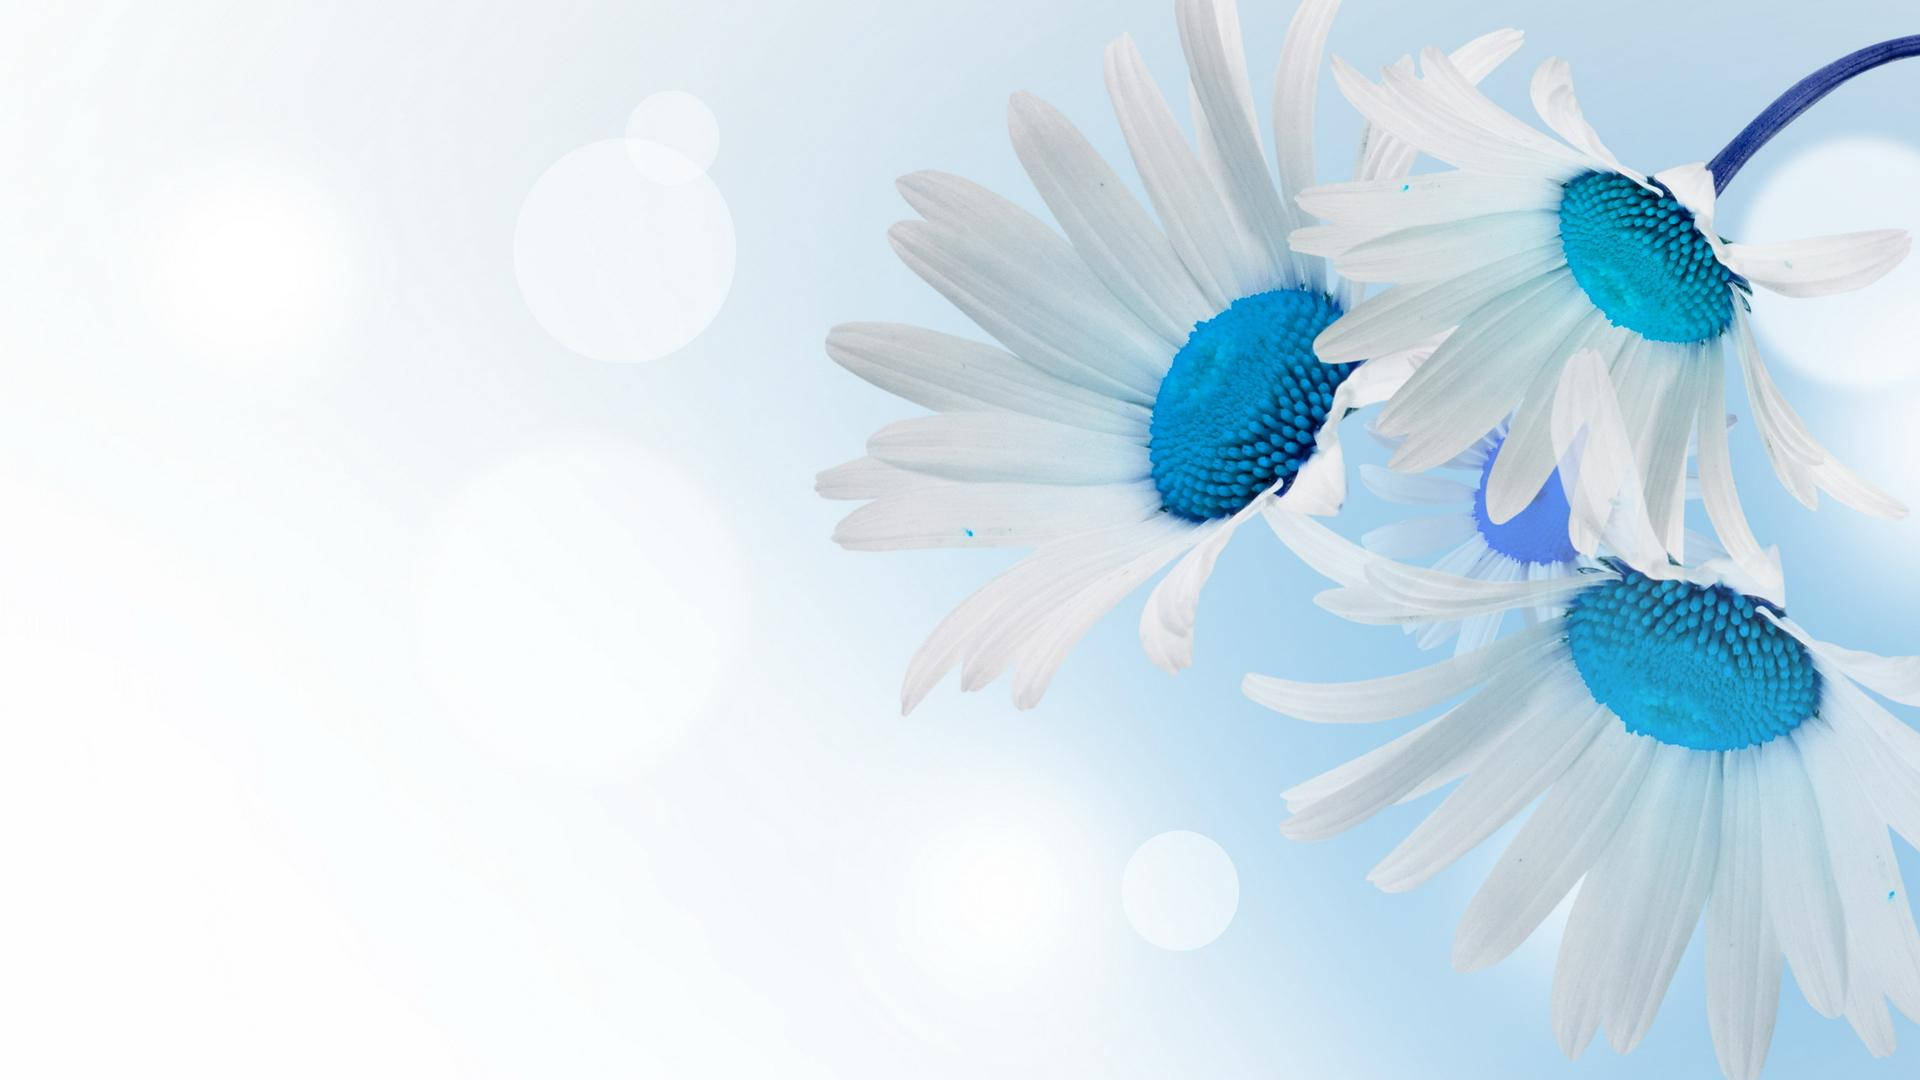 Blue And White Blooms Of Daisies Background